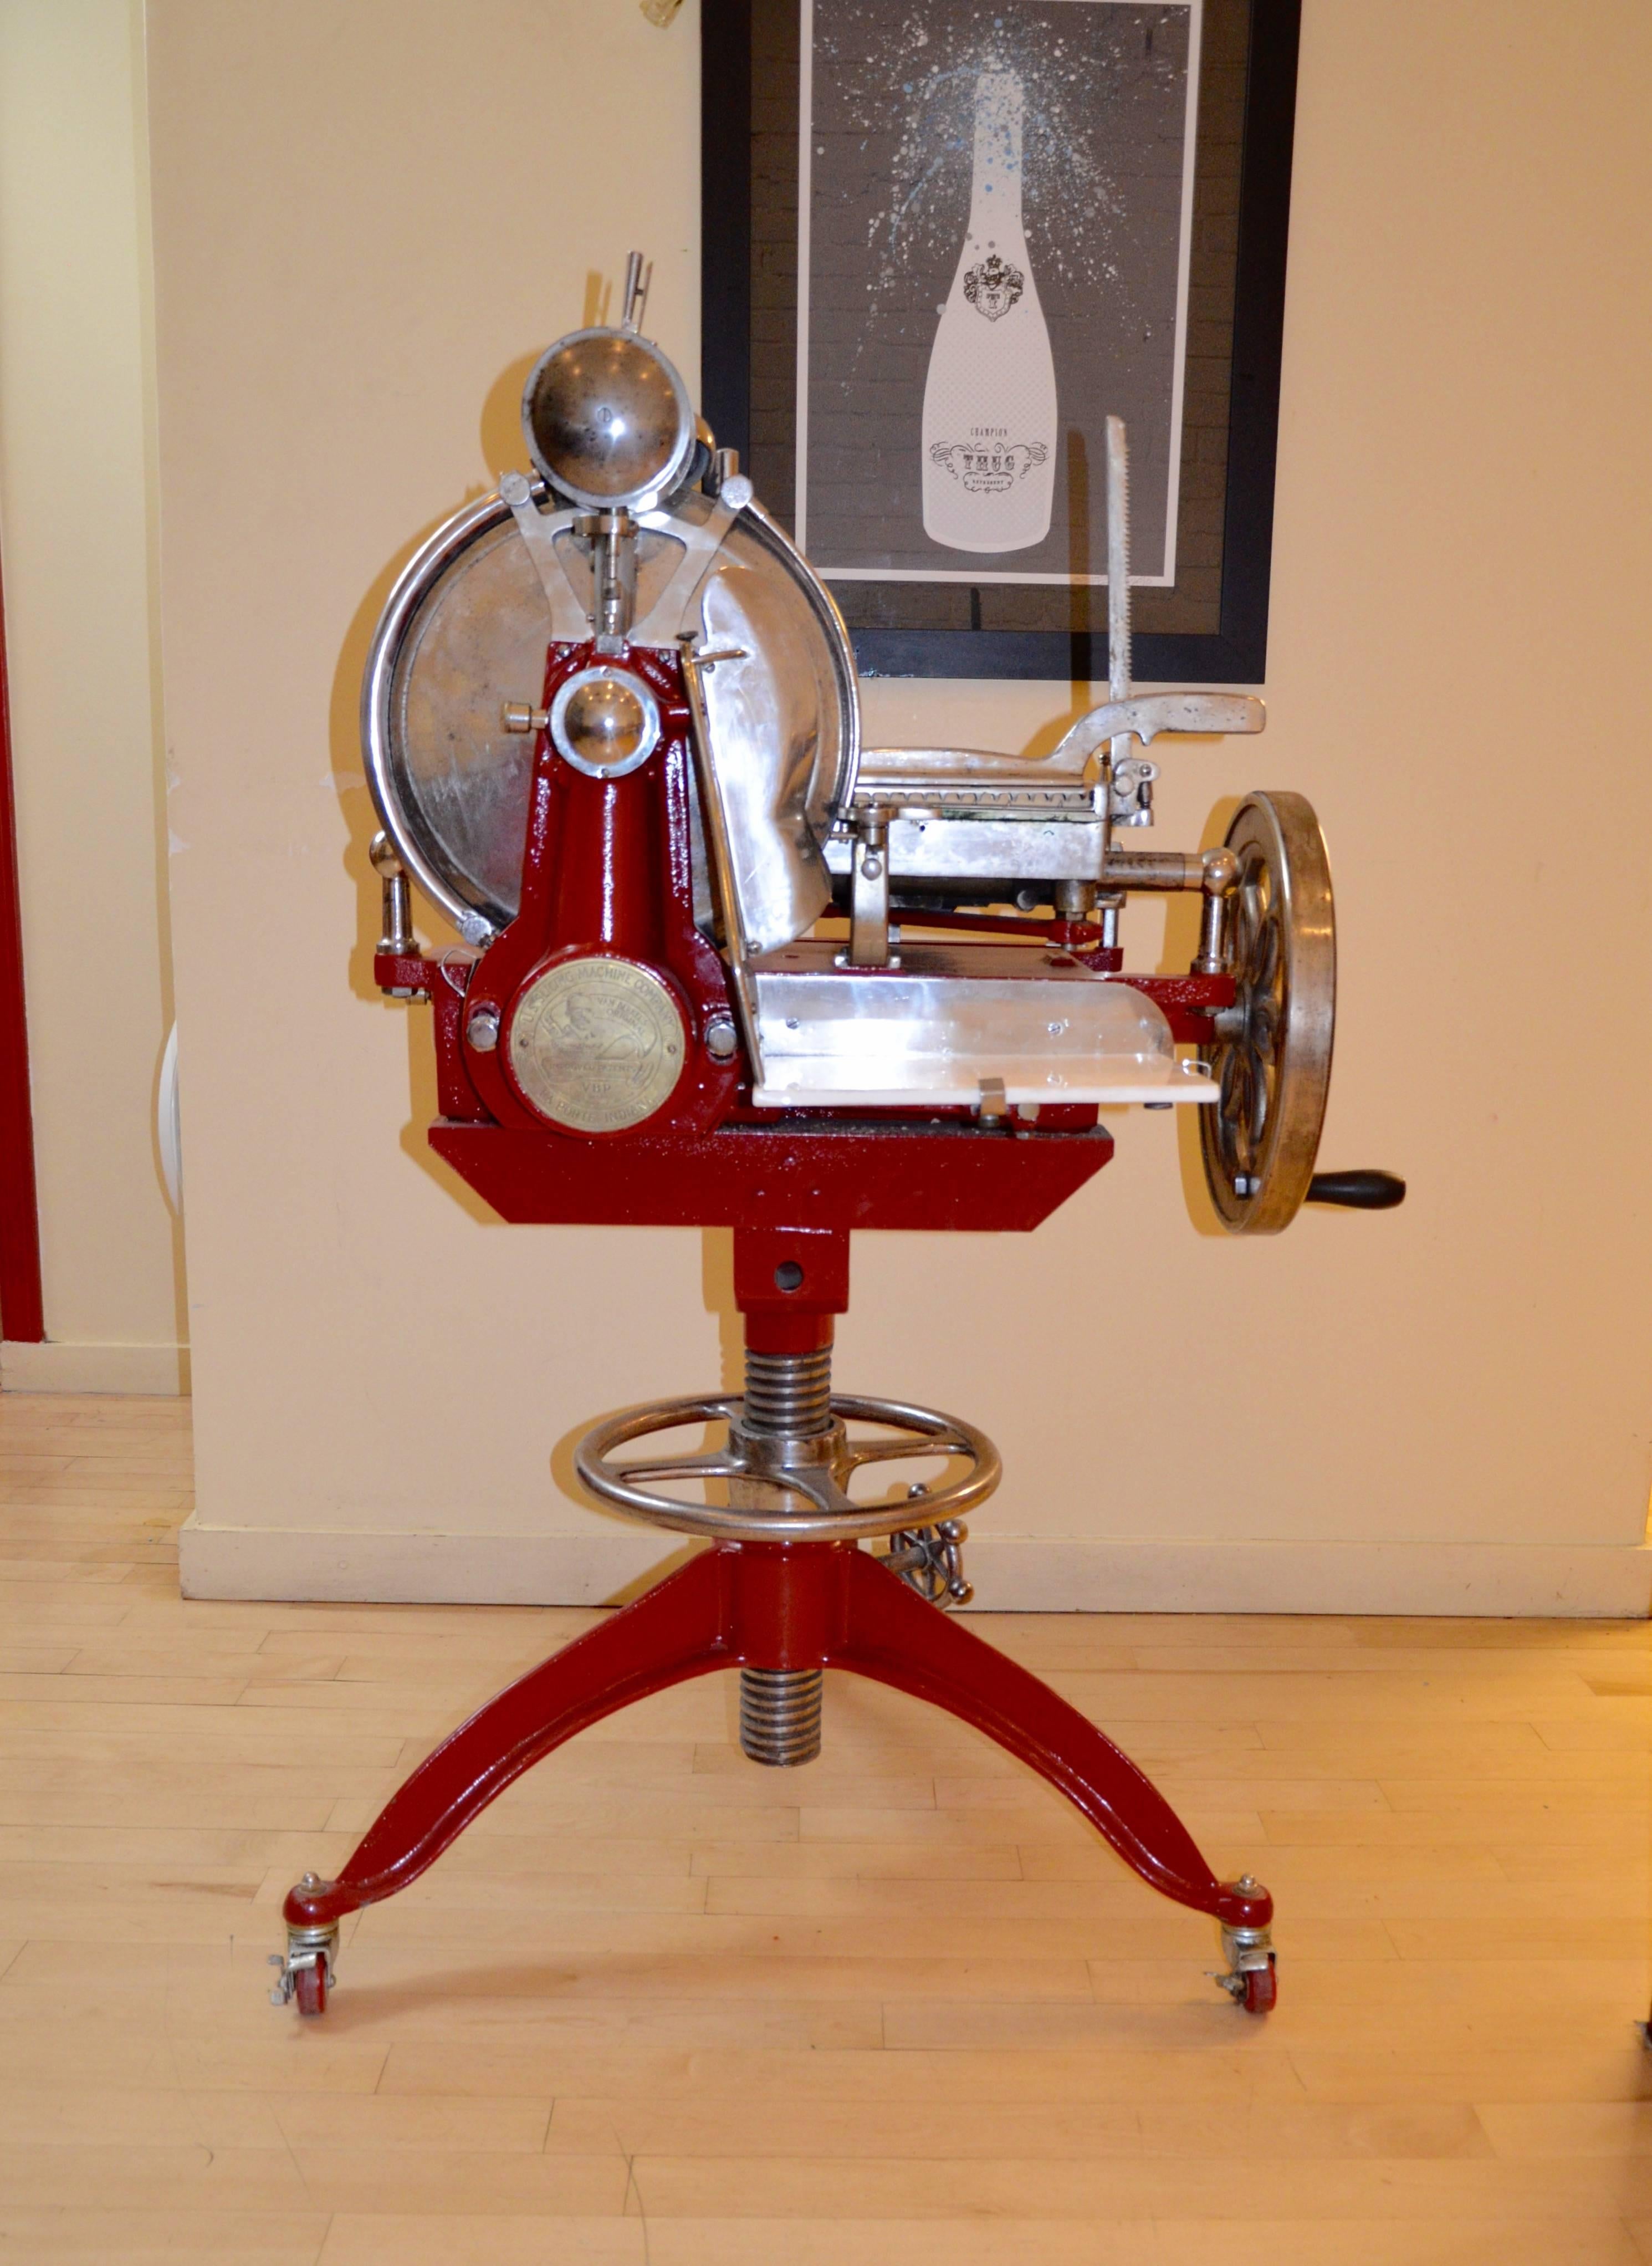 Made by the US Slicing Machine Comapany, This manual slicer is as beautiful as it is functional. This has been expertly restored, with the working parts polished, and the base and body have  a bold red powder coat.